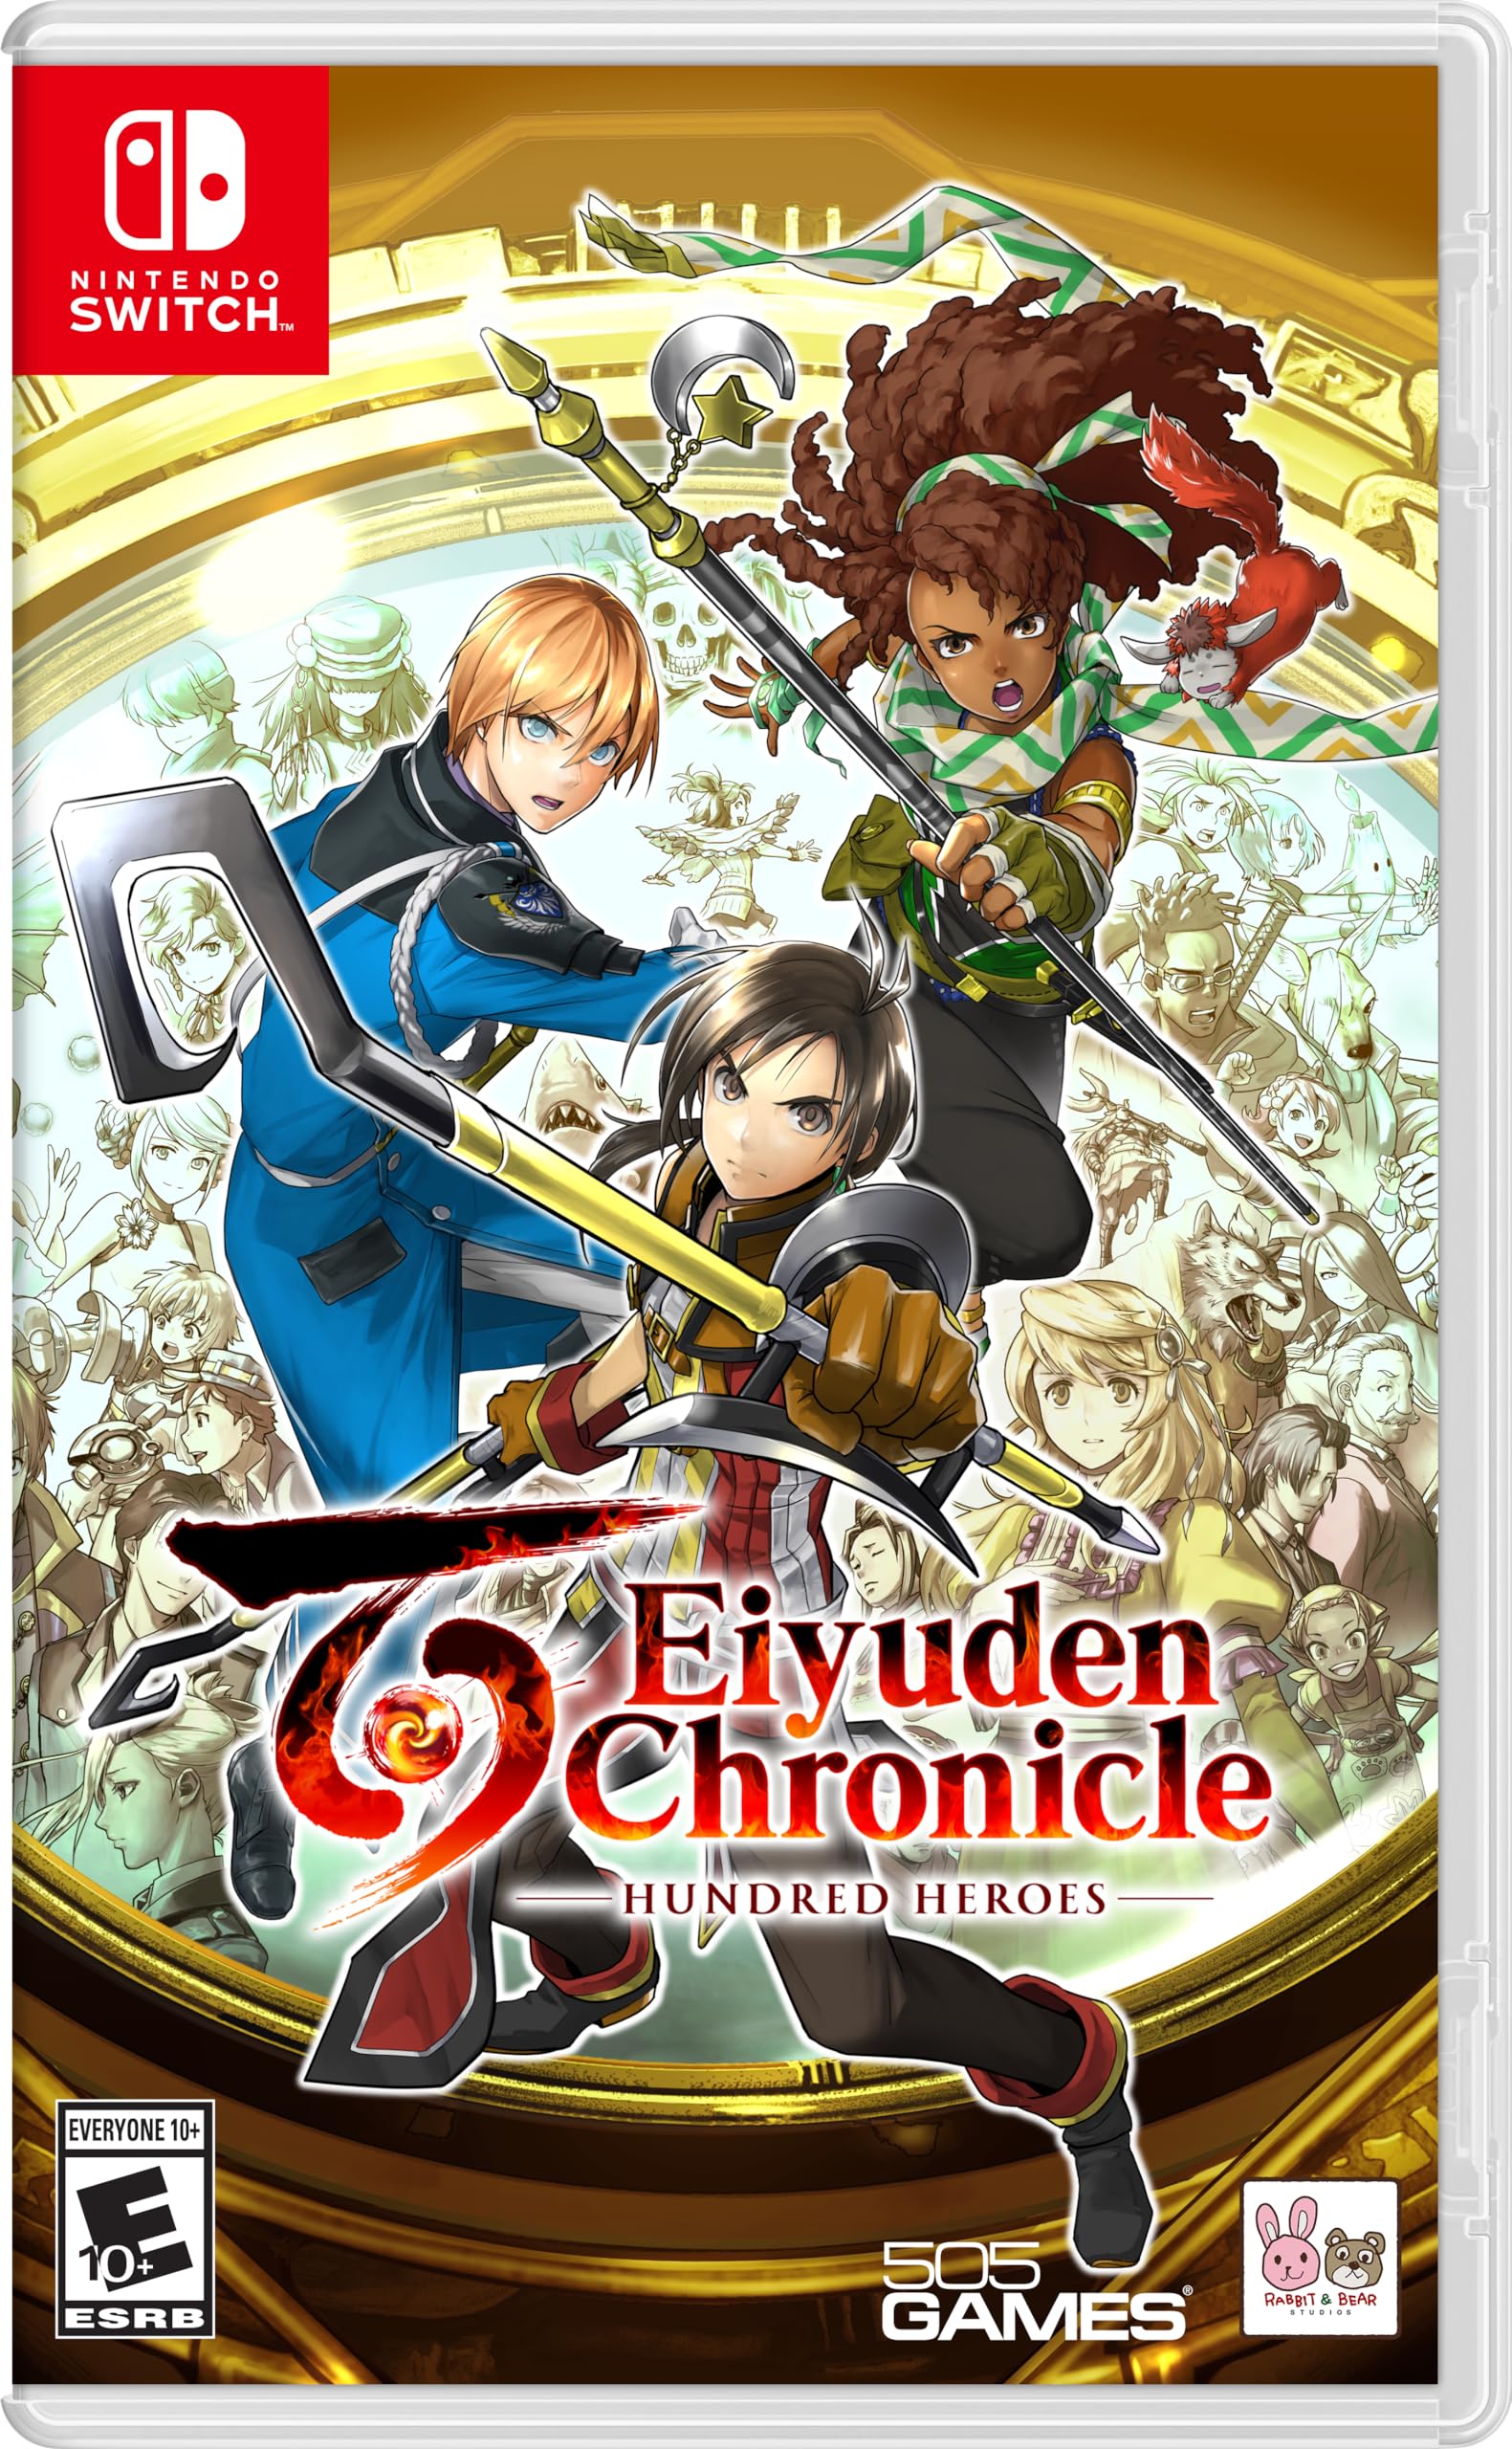 Eiyuden Chronicle: Hundred Heroes - (NSW) Nintendo Switch Video Games 505 Games   